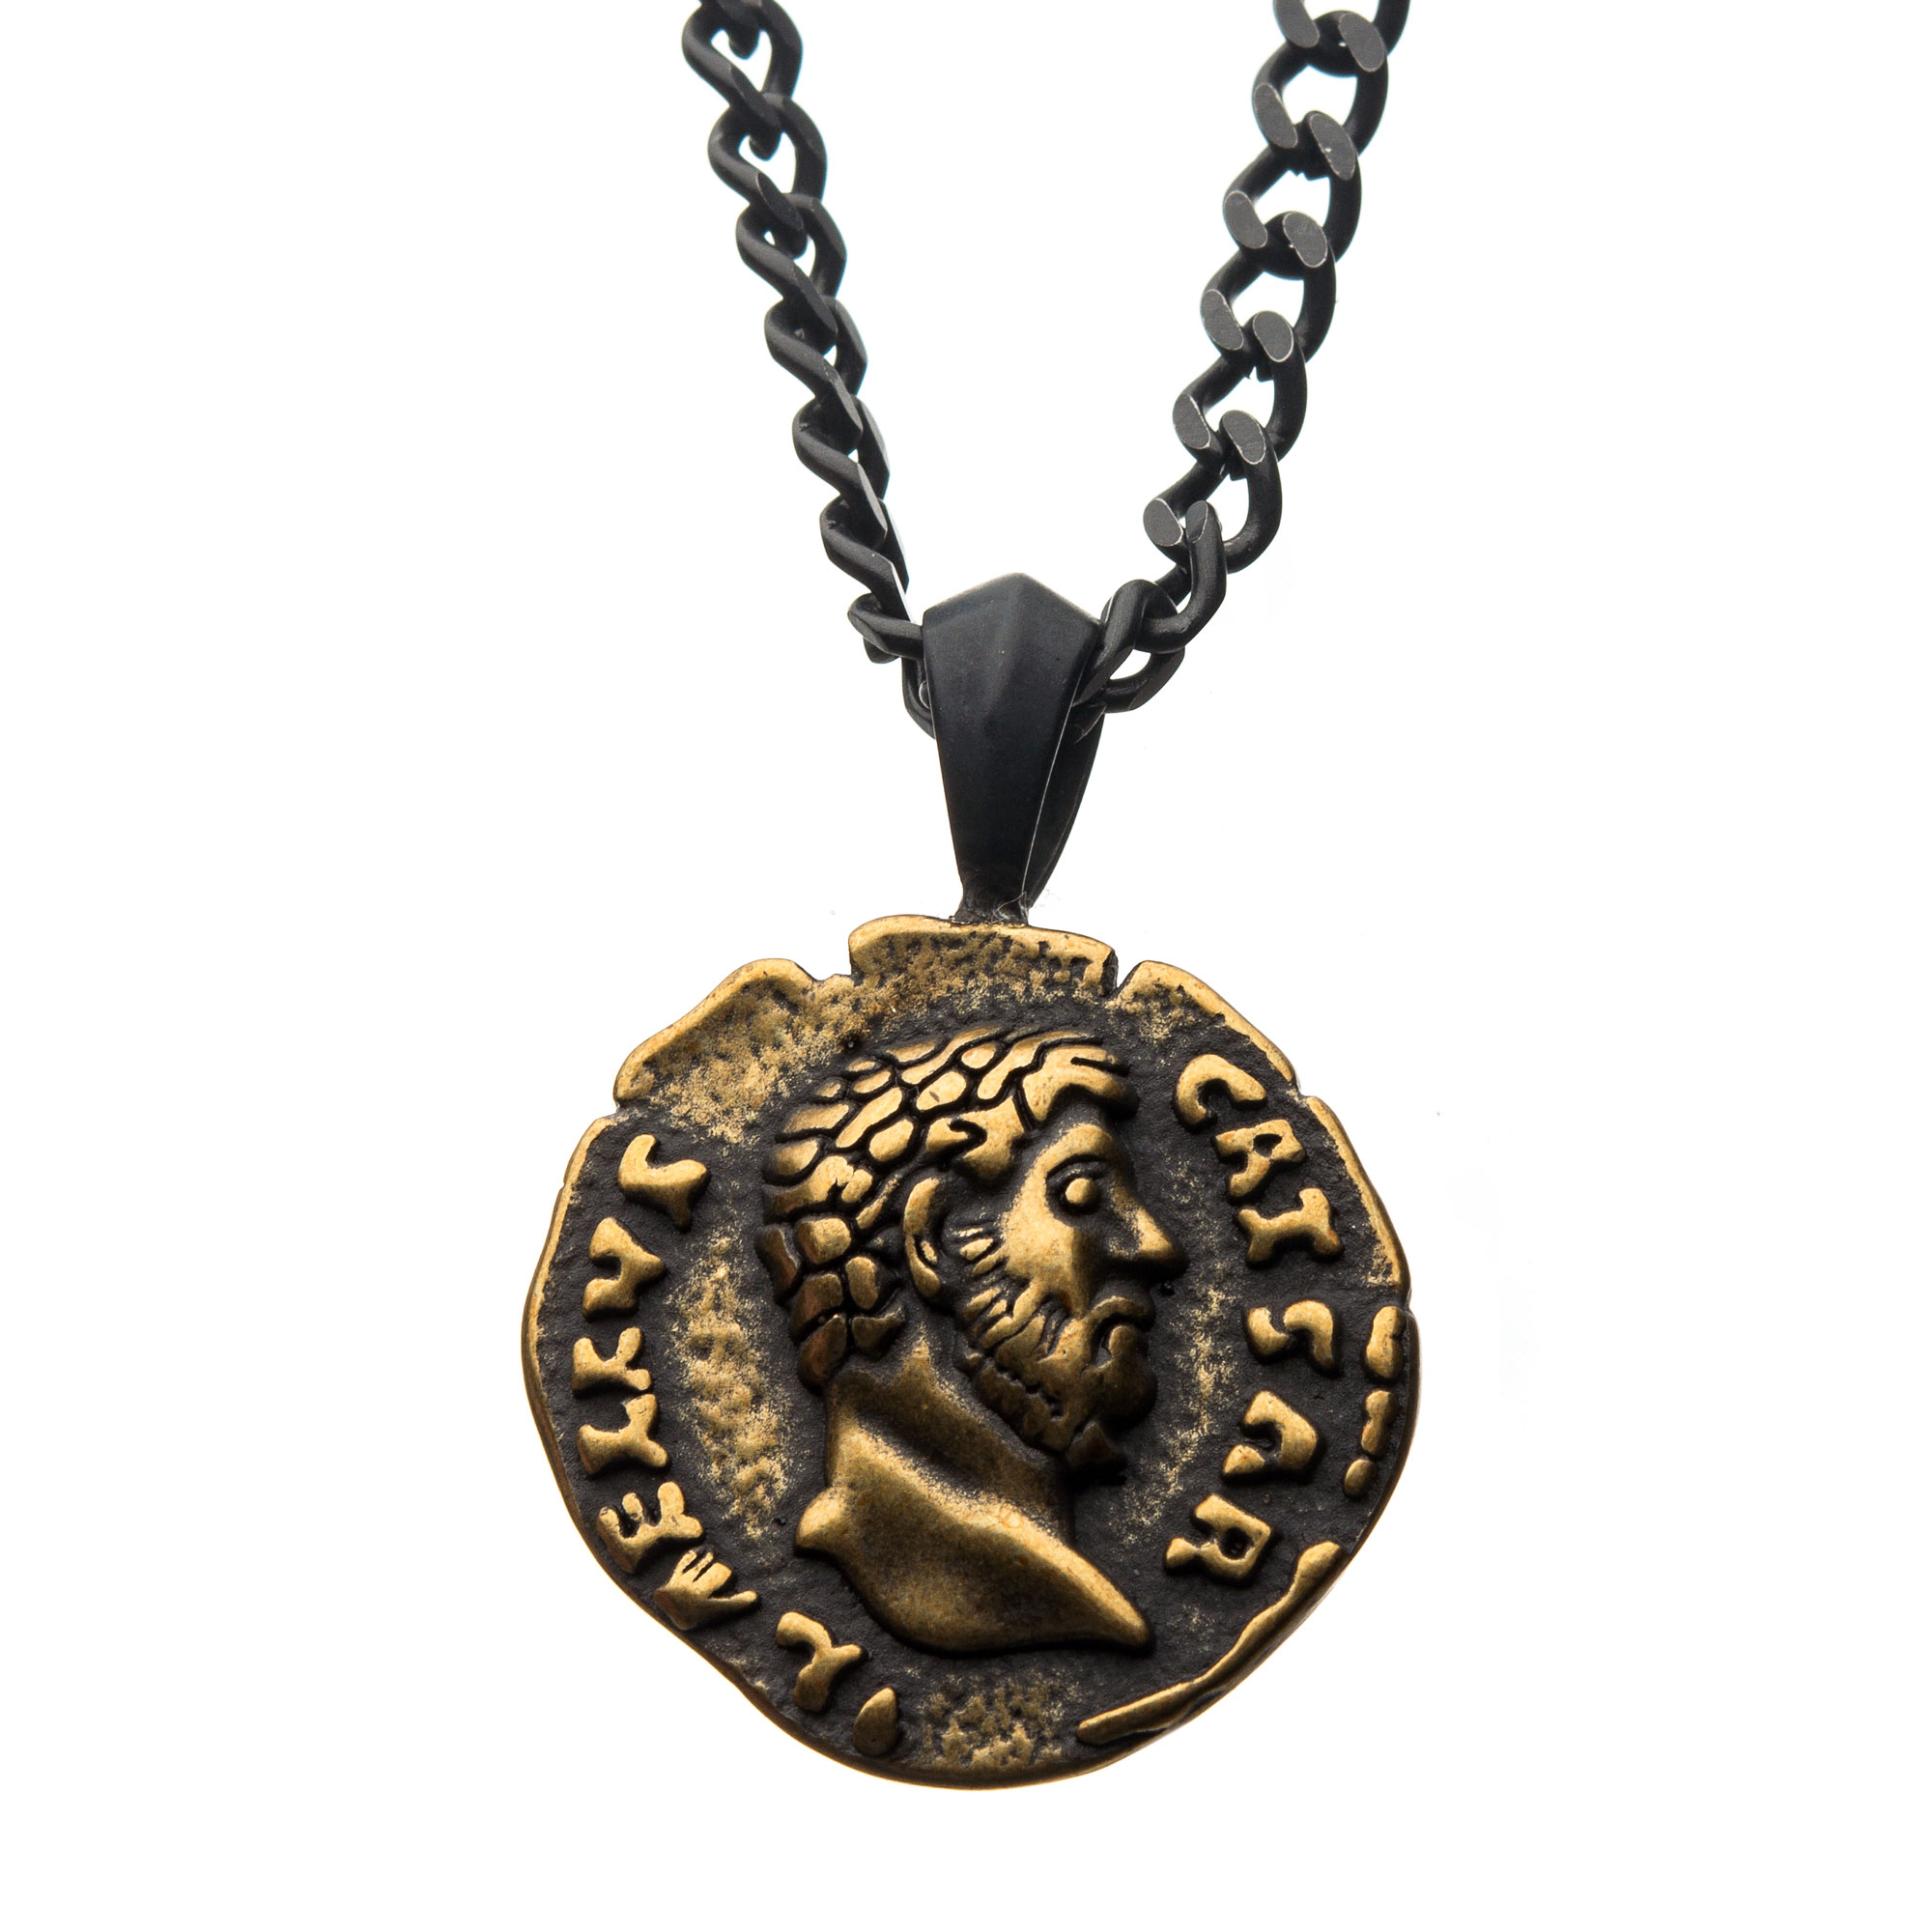 Steel Antiqued Coin Pendant with Chain Lewis Jewelers, Inc. Ansonia, CT